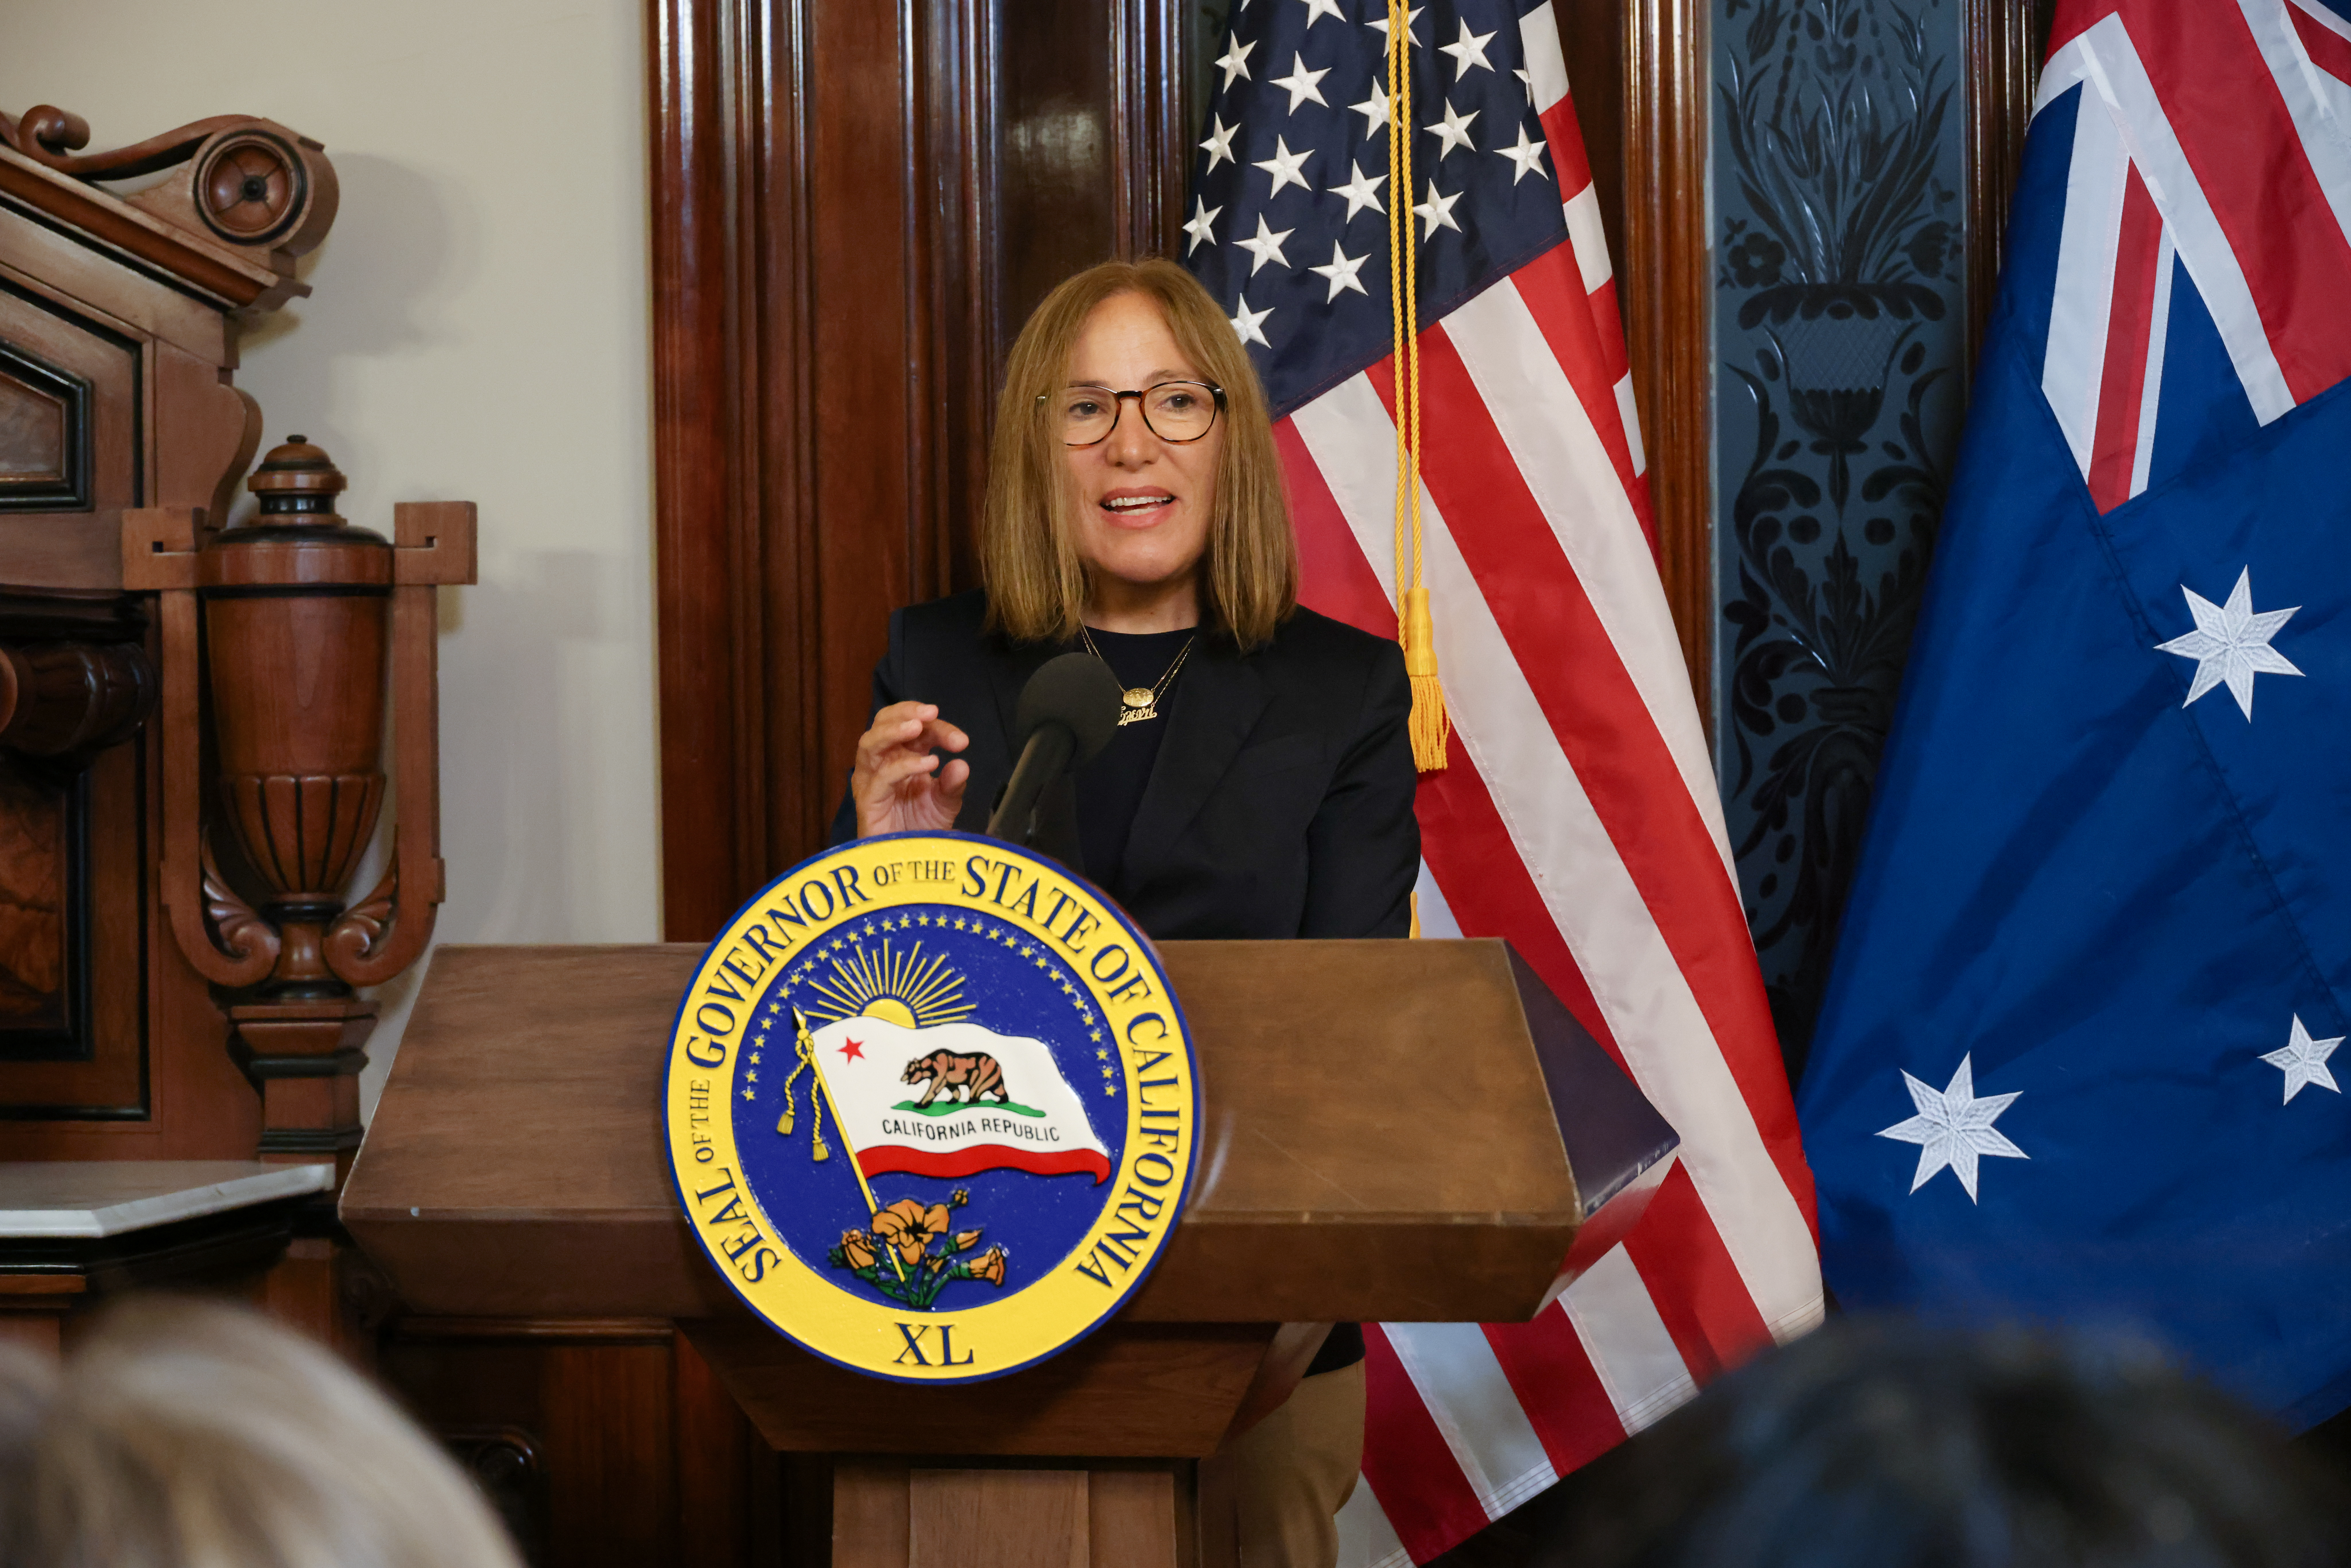 Image of Lt. Governor speaking at Australia and California MOU Signing